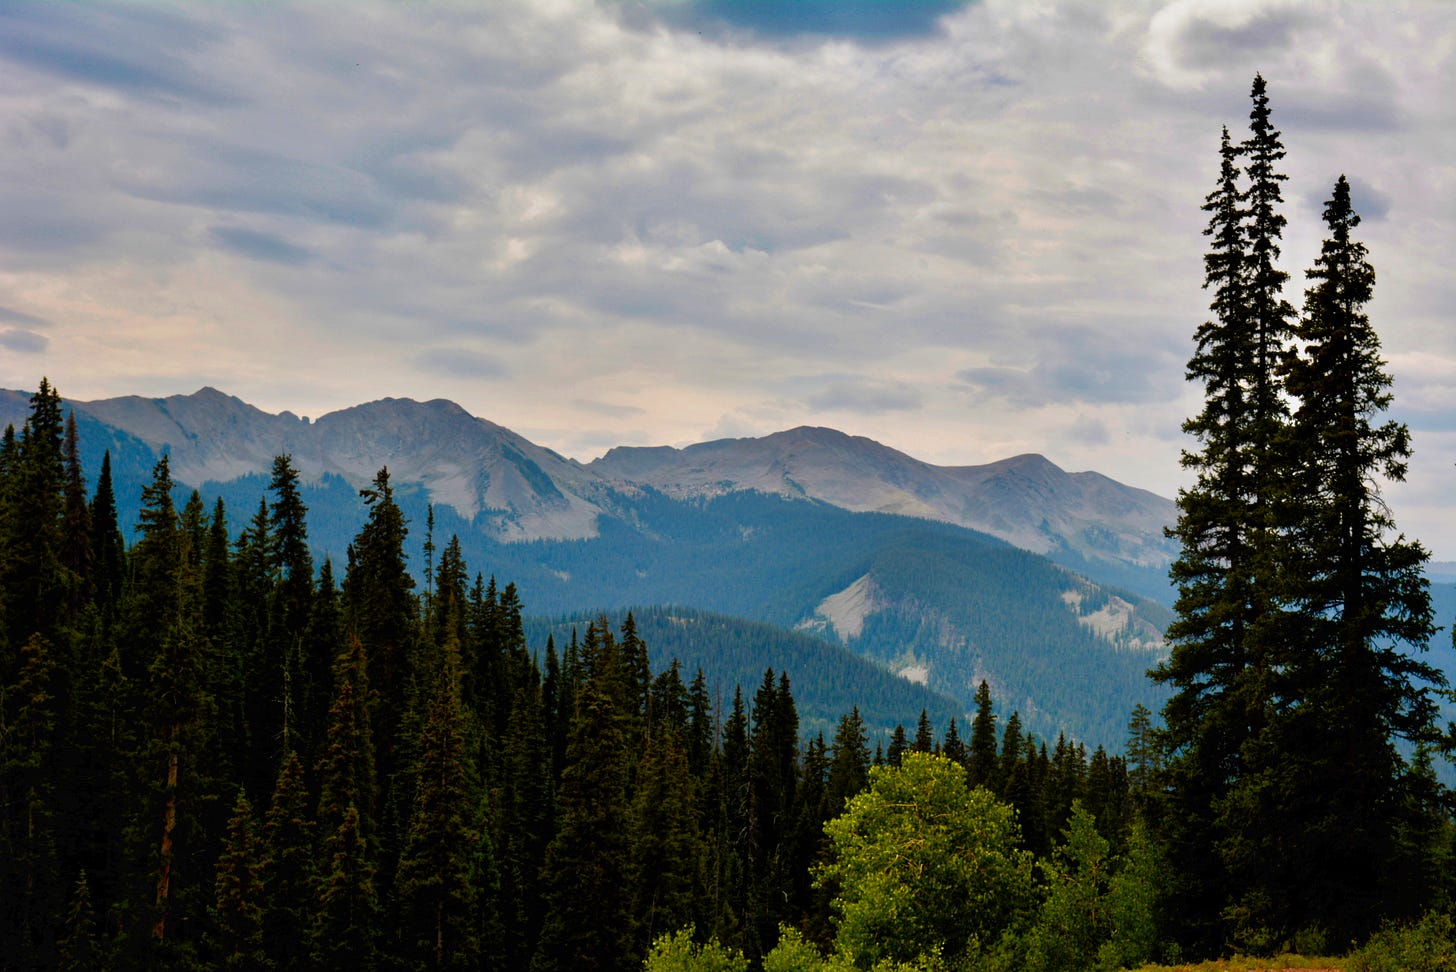 a view of the colorado mountains with trees in the foreground against a cloudy sky with specks of blue showing between the clouds